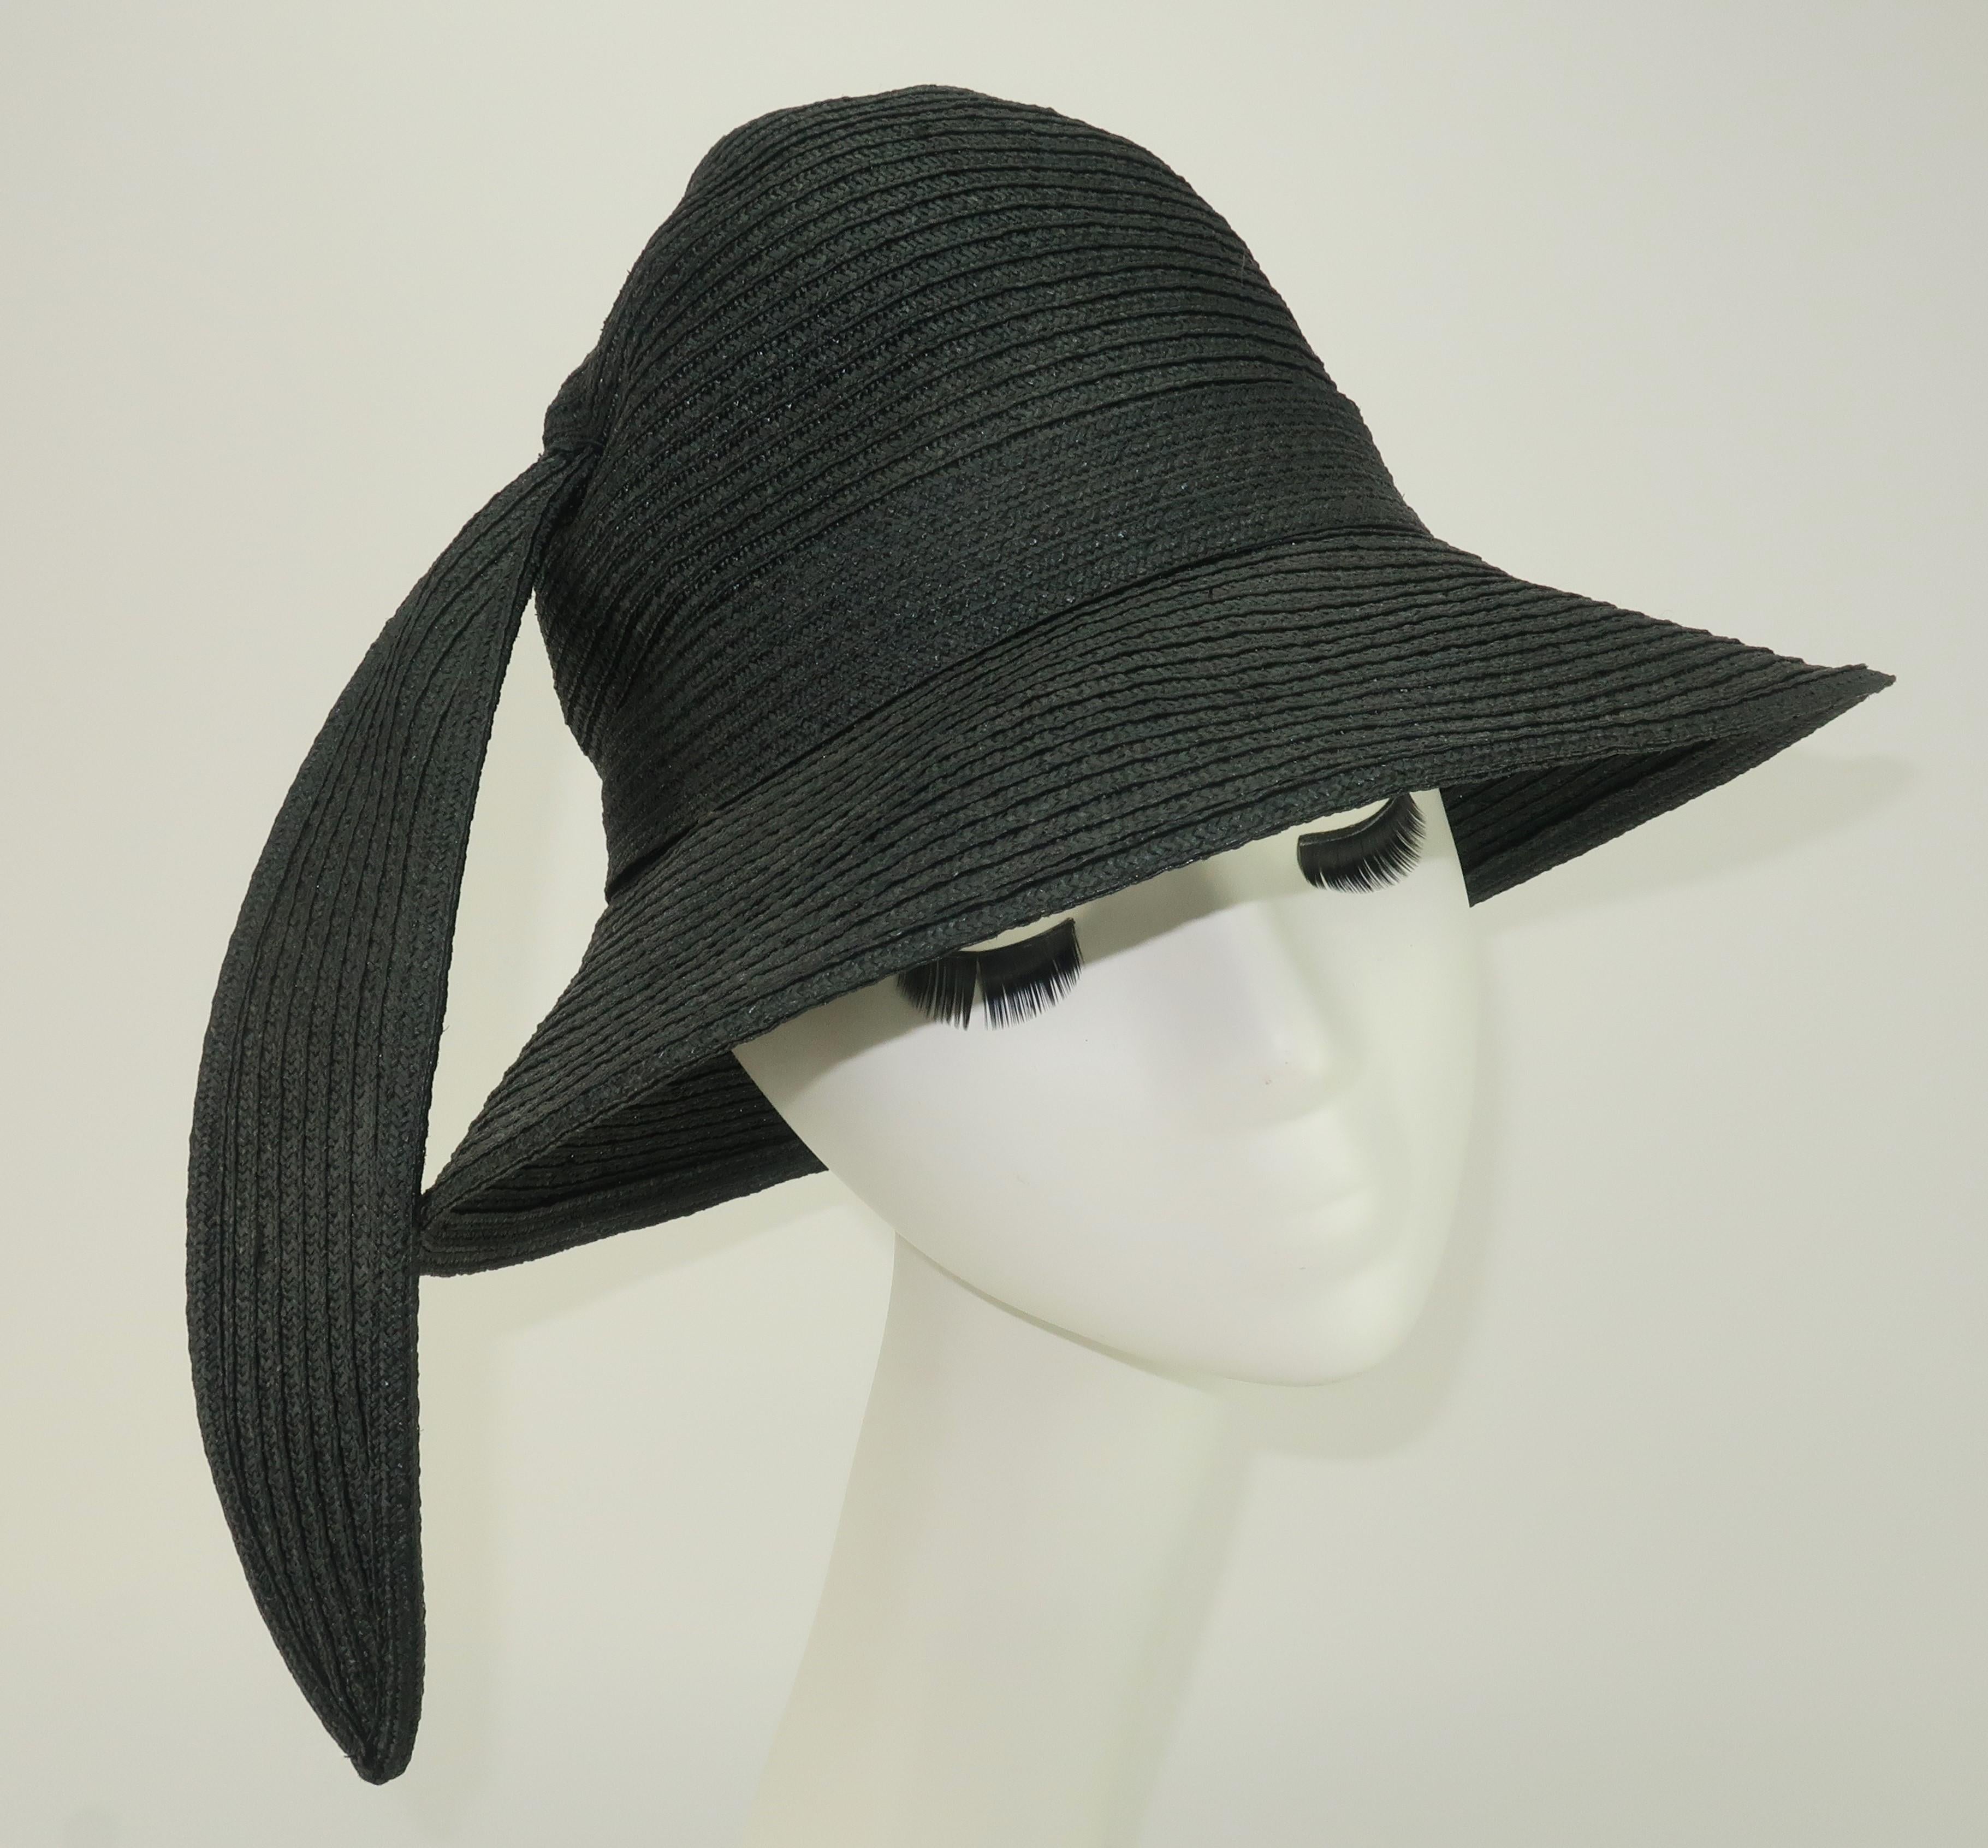 1970's Yves Saint Laurent black straw hat in a bucket shape with a black straw embellishment reminiscent of a feather making this topper a true 'feather in your cap'!  The inside rim is lined with YSL's iconic aqua blue grosgrain ribbon and the hat